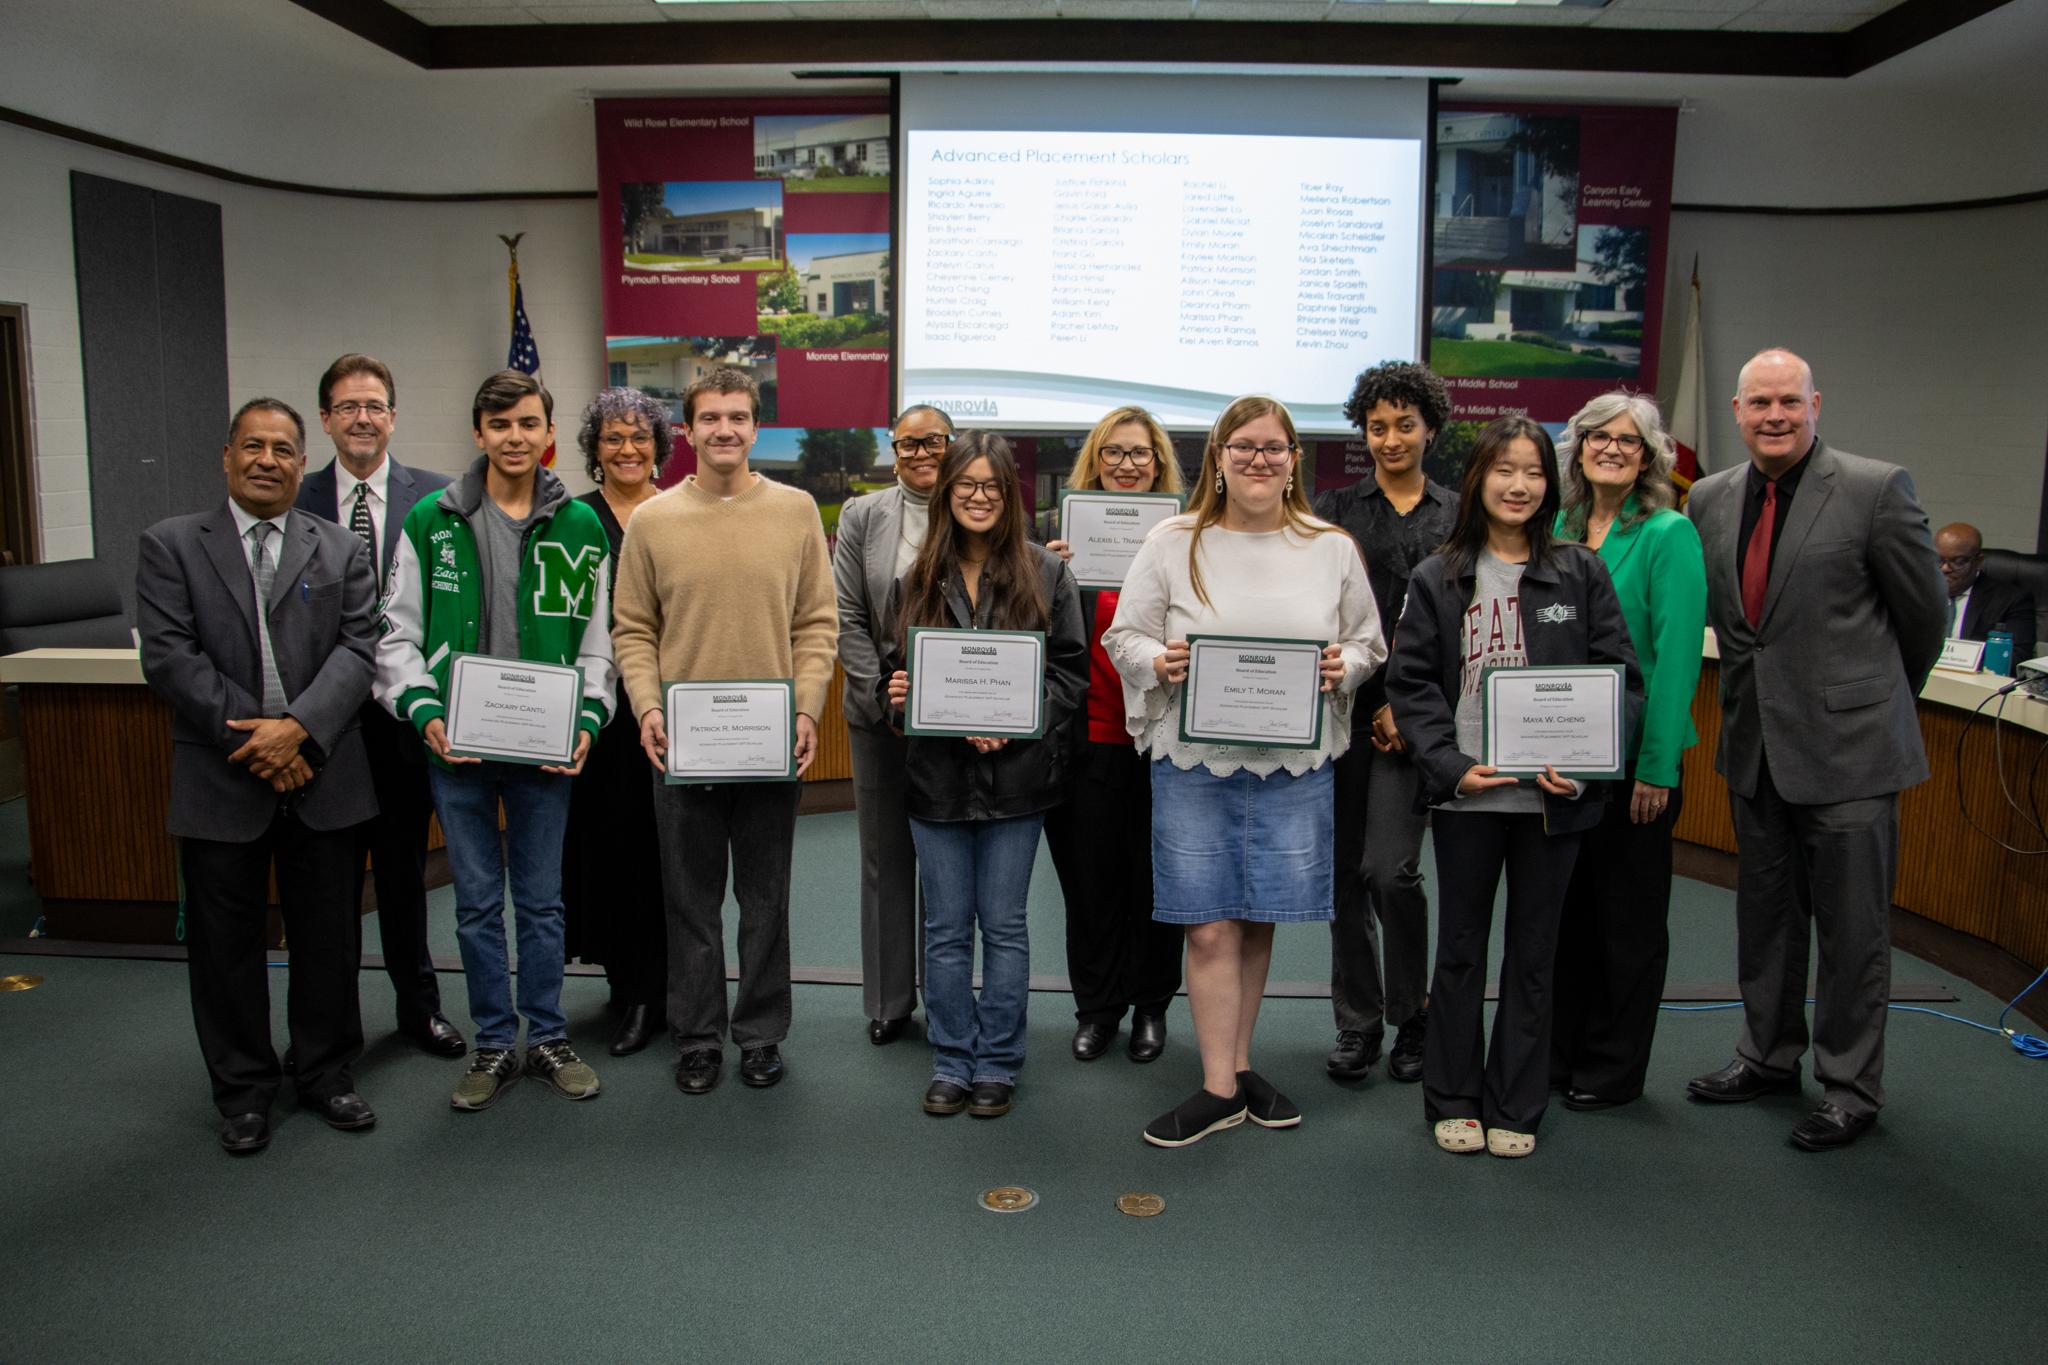 Board members highlighted the latest Advanced Placement Scholars at Monrovia High School.